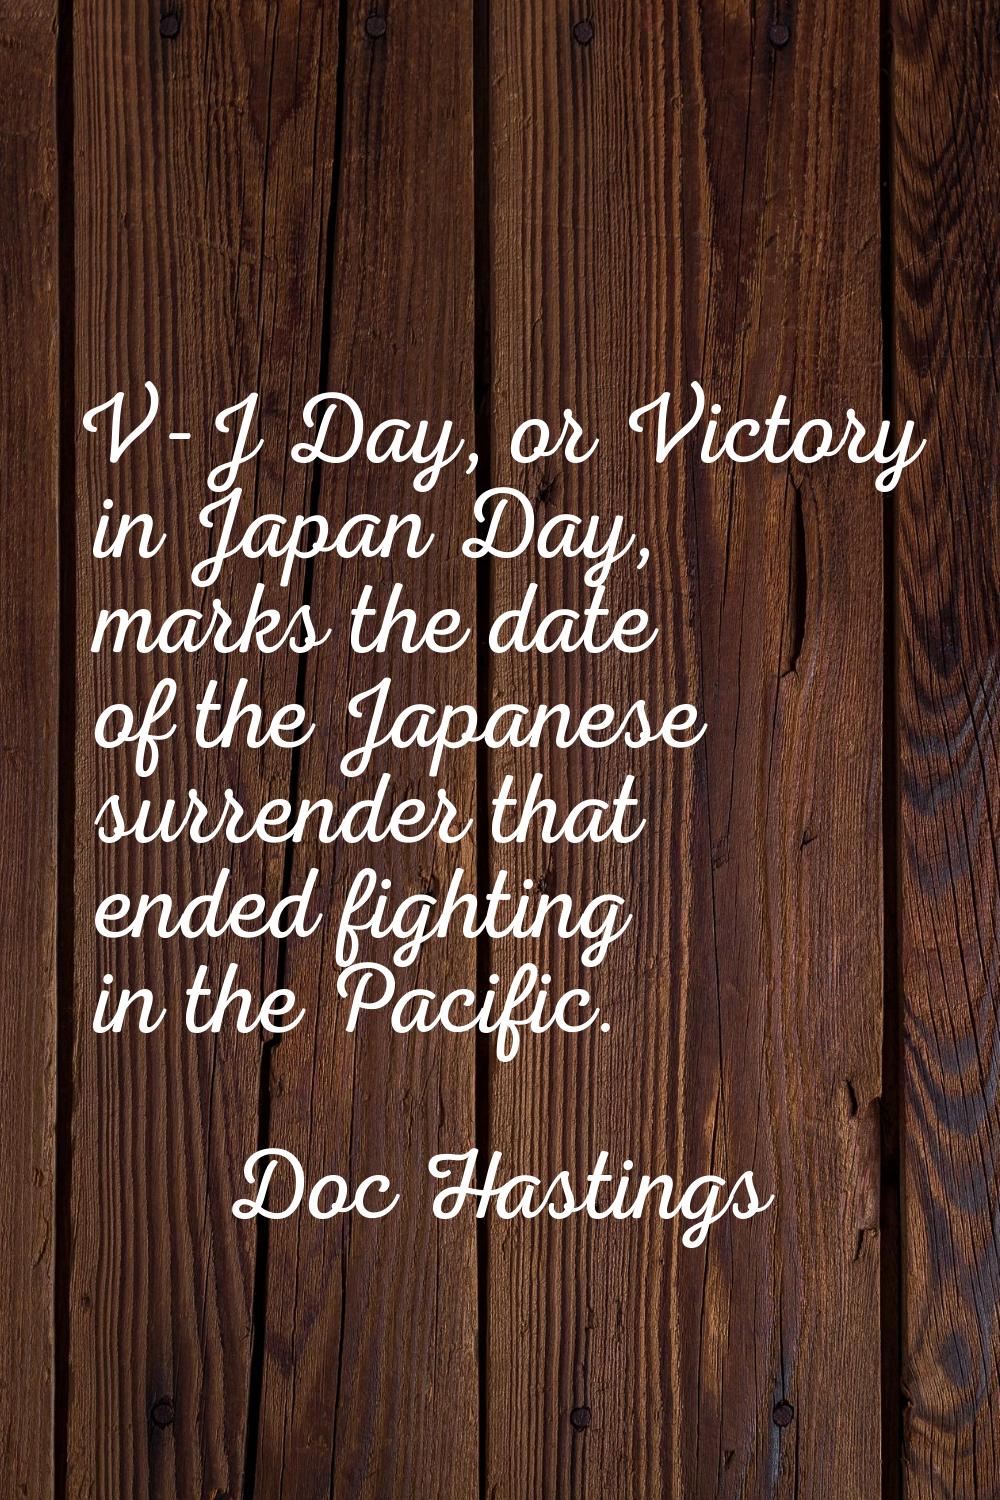 V-J Day, or Victory in Japan Day, marks the date of the Japanese surrender that ended fighting in t